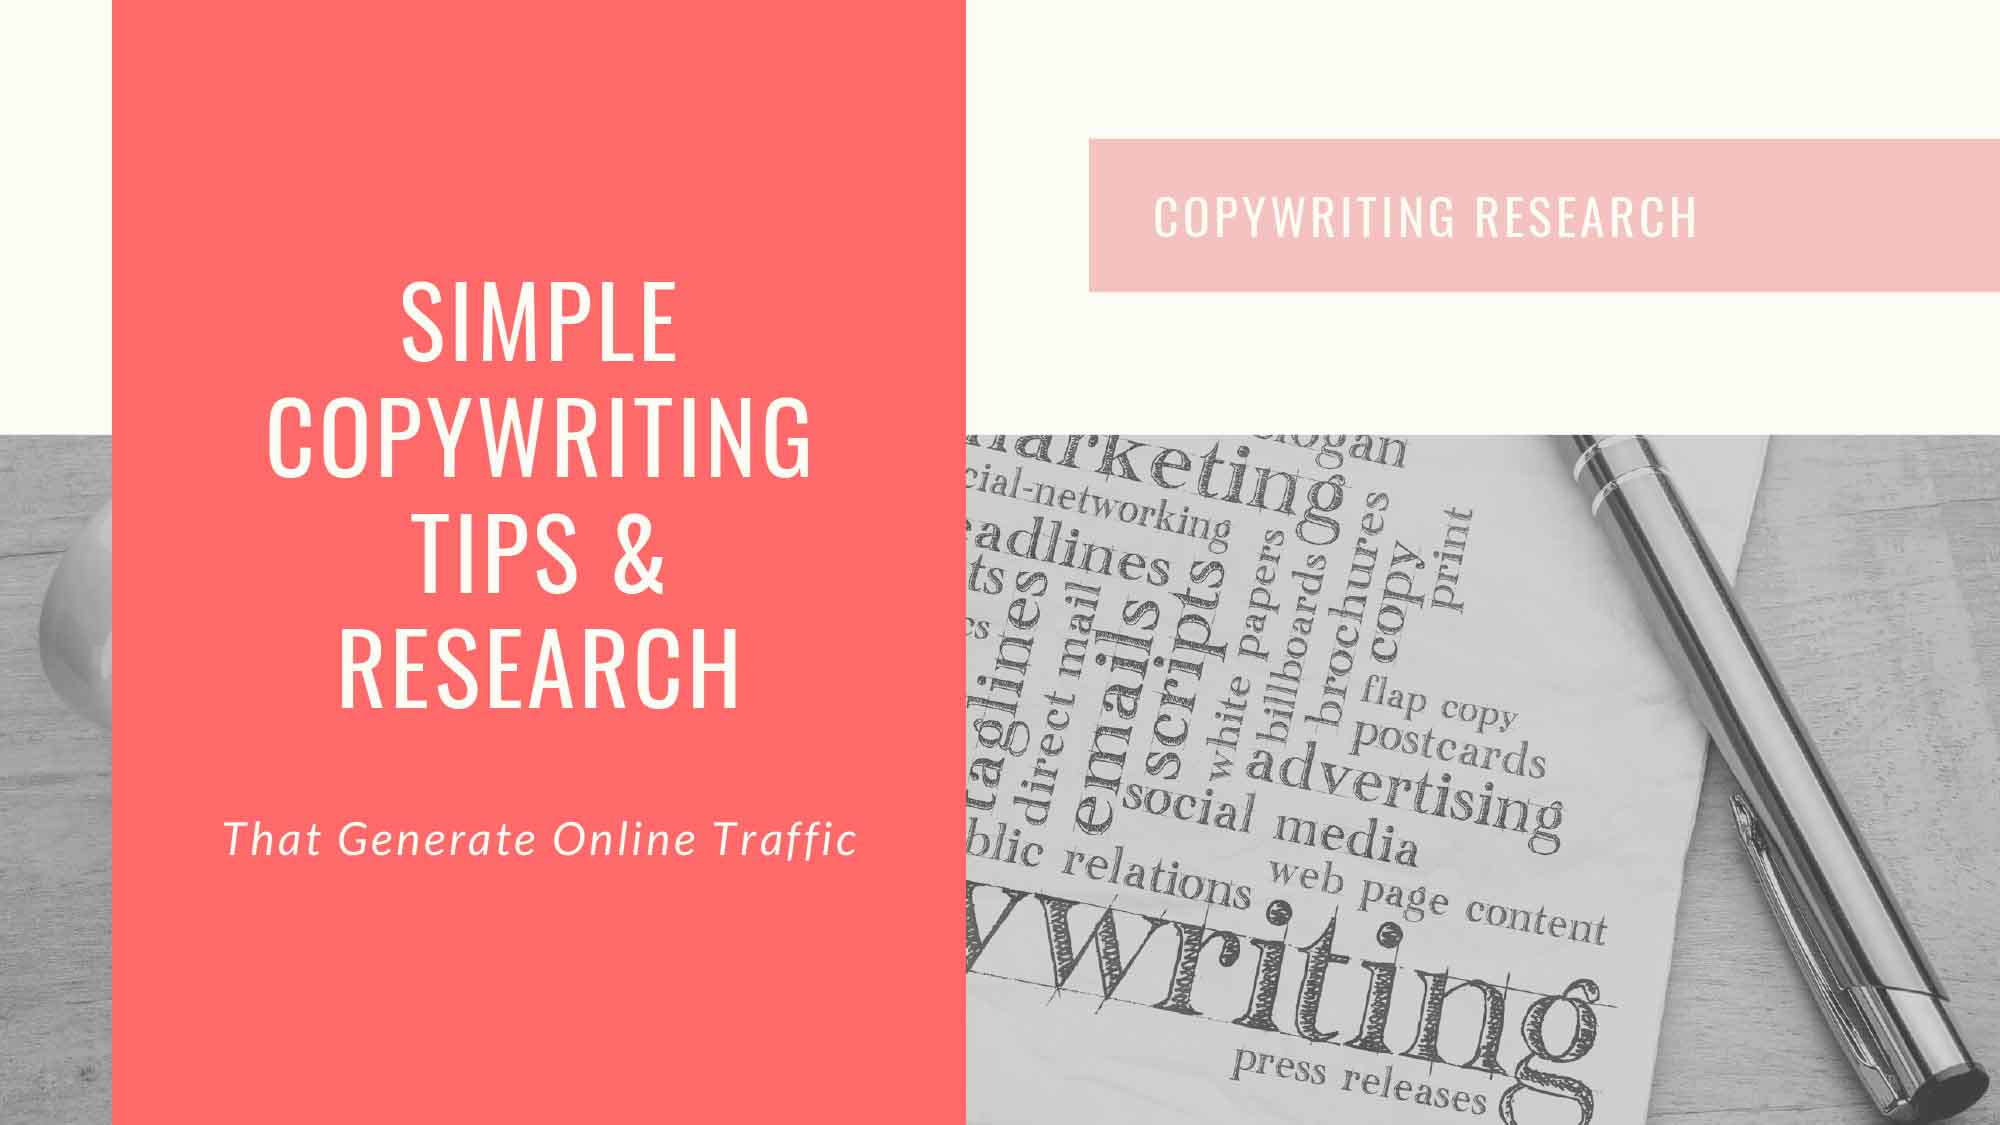 Simple Copywriting Tips & Research That Generate Online Traffic